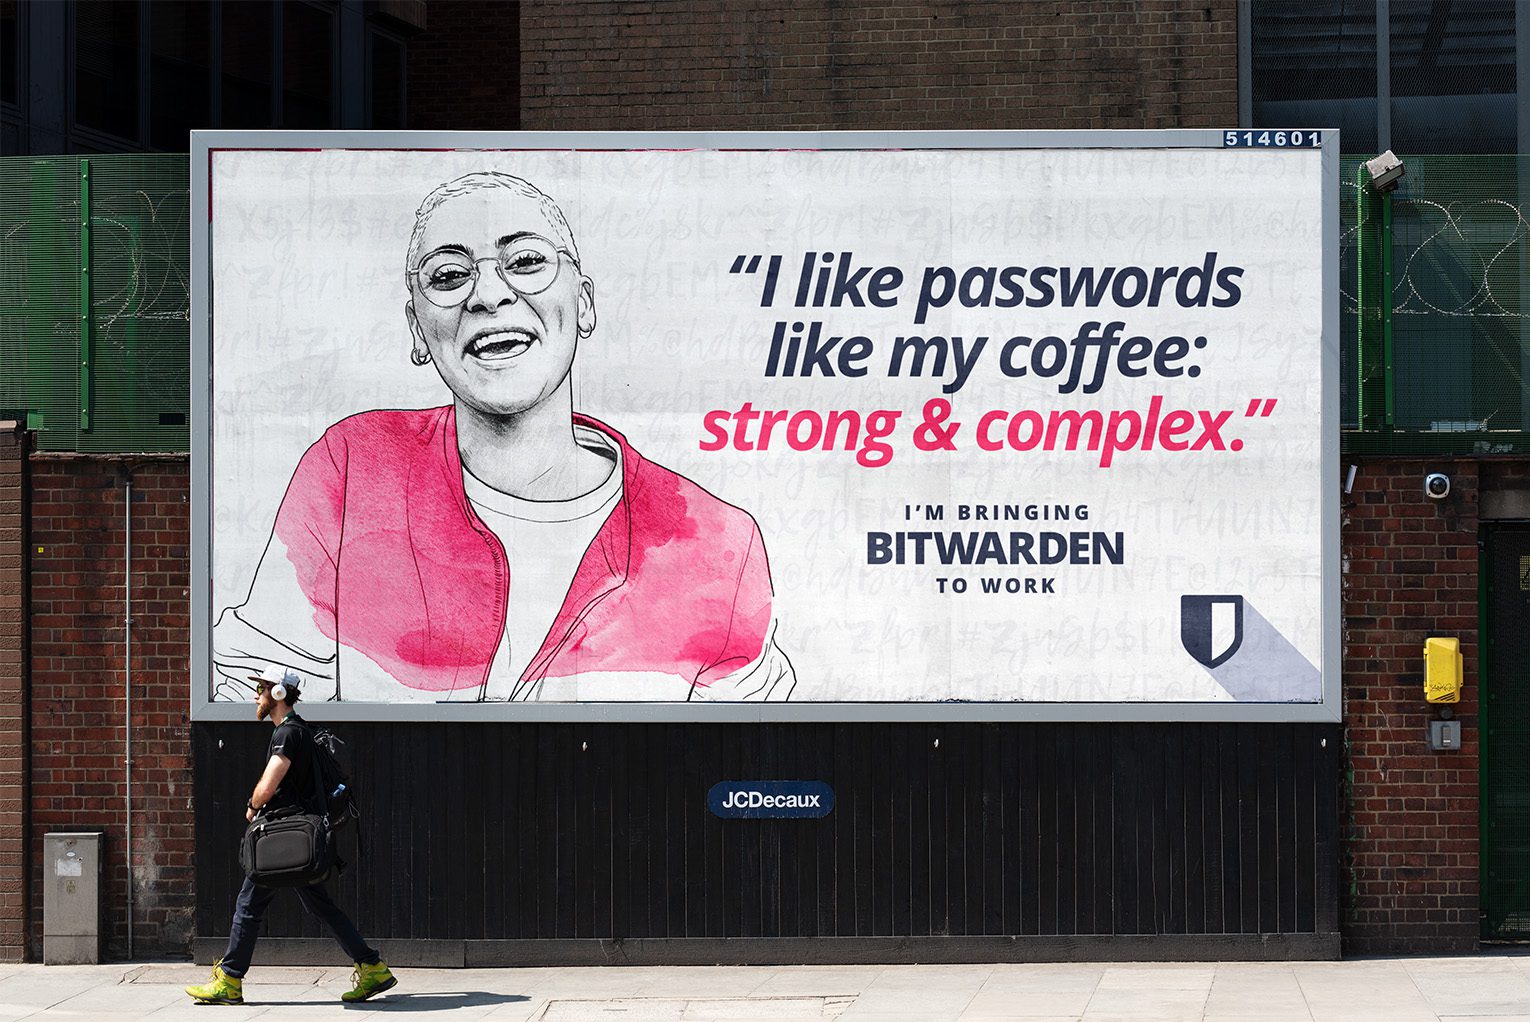 I like passwords like my coffee: strong & complex.